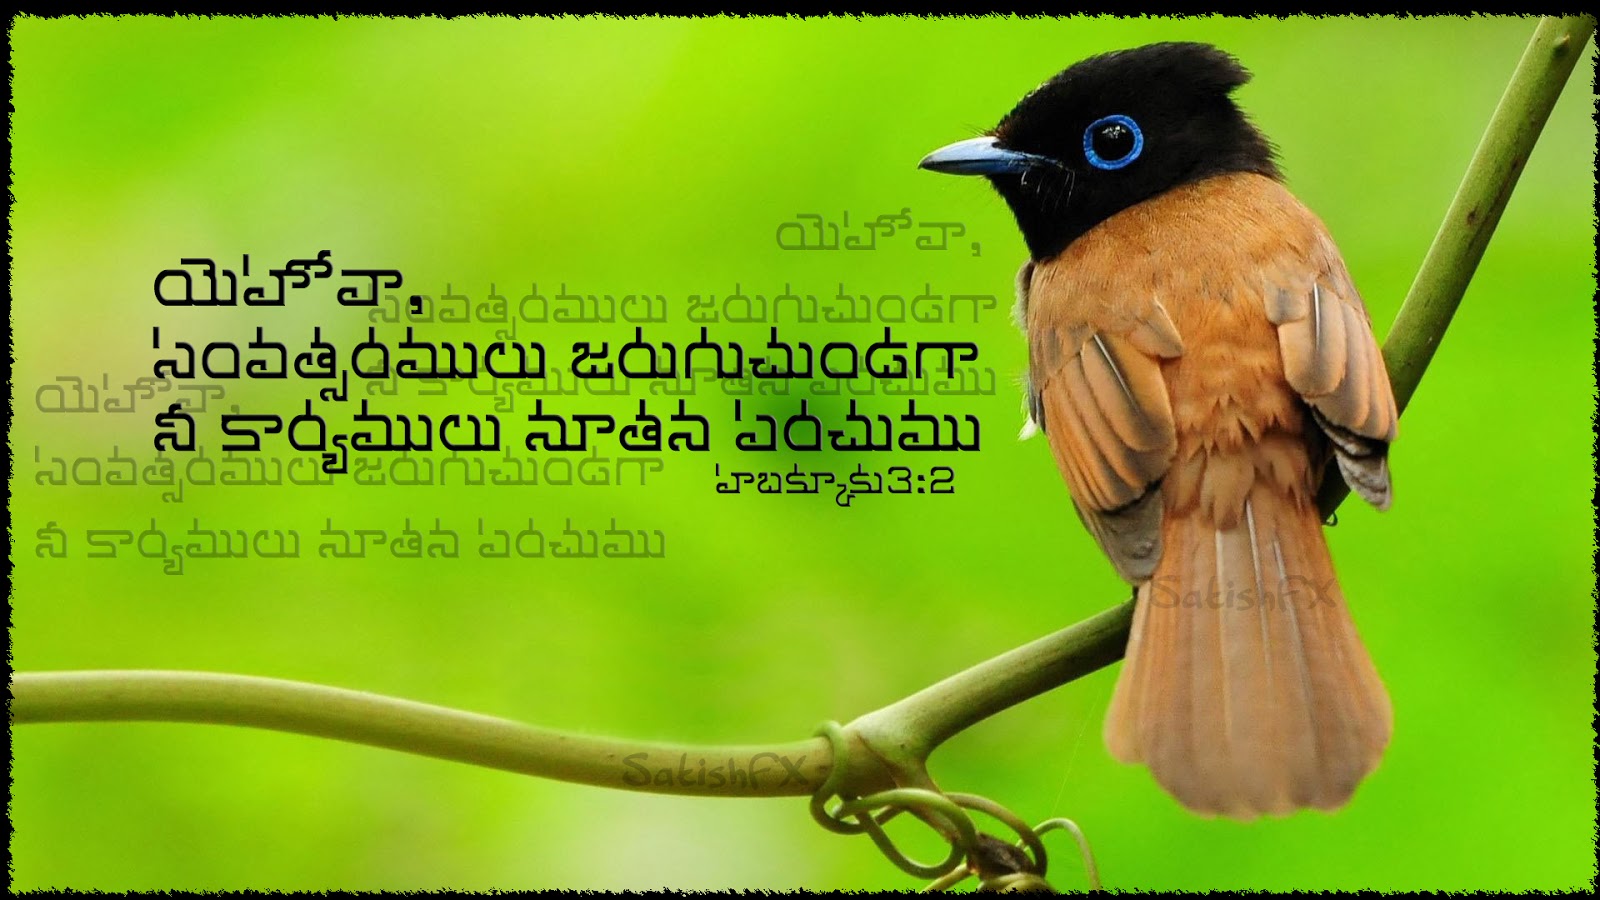 TELUGU CHRISTIAN BIBLE VERSES WALLPAPERS - I ~ Freely you have received ...